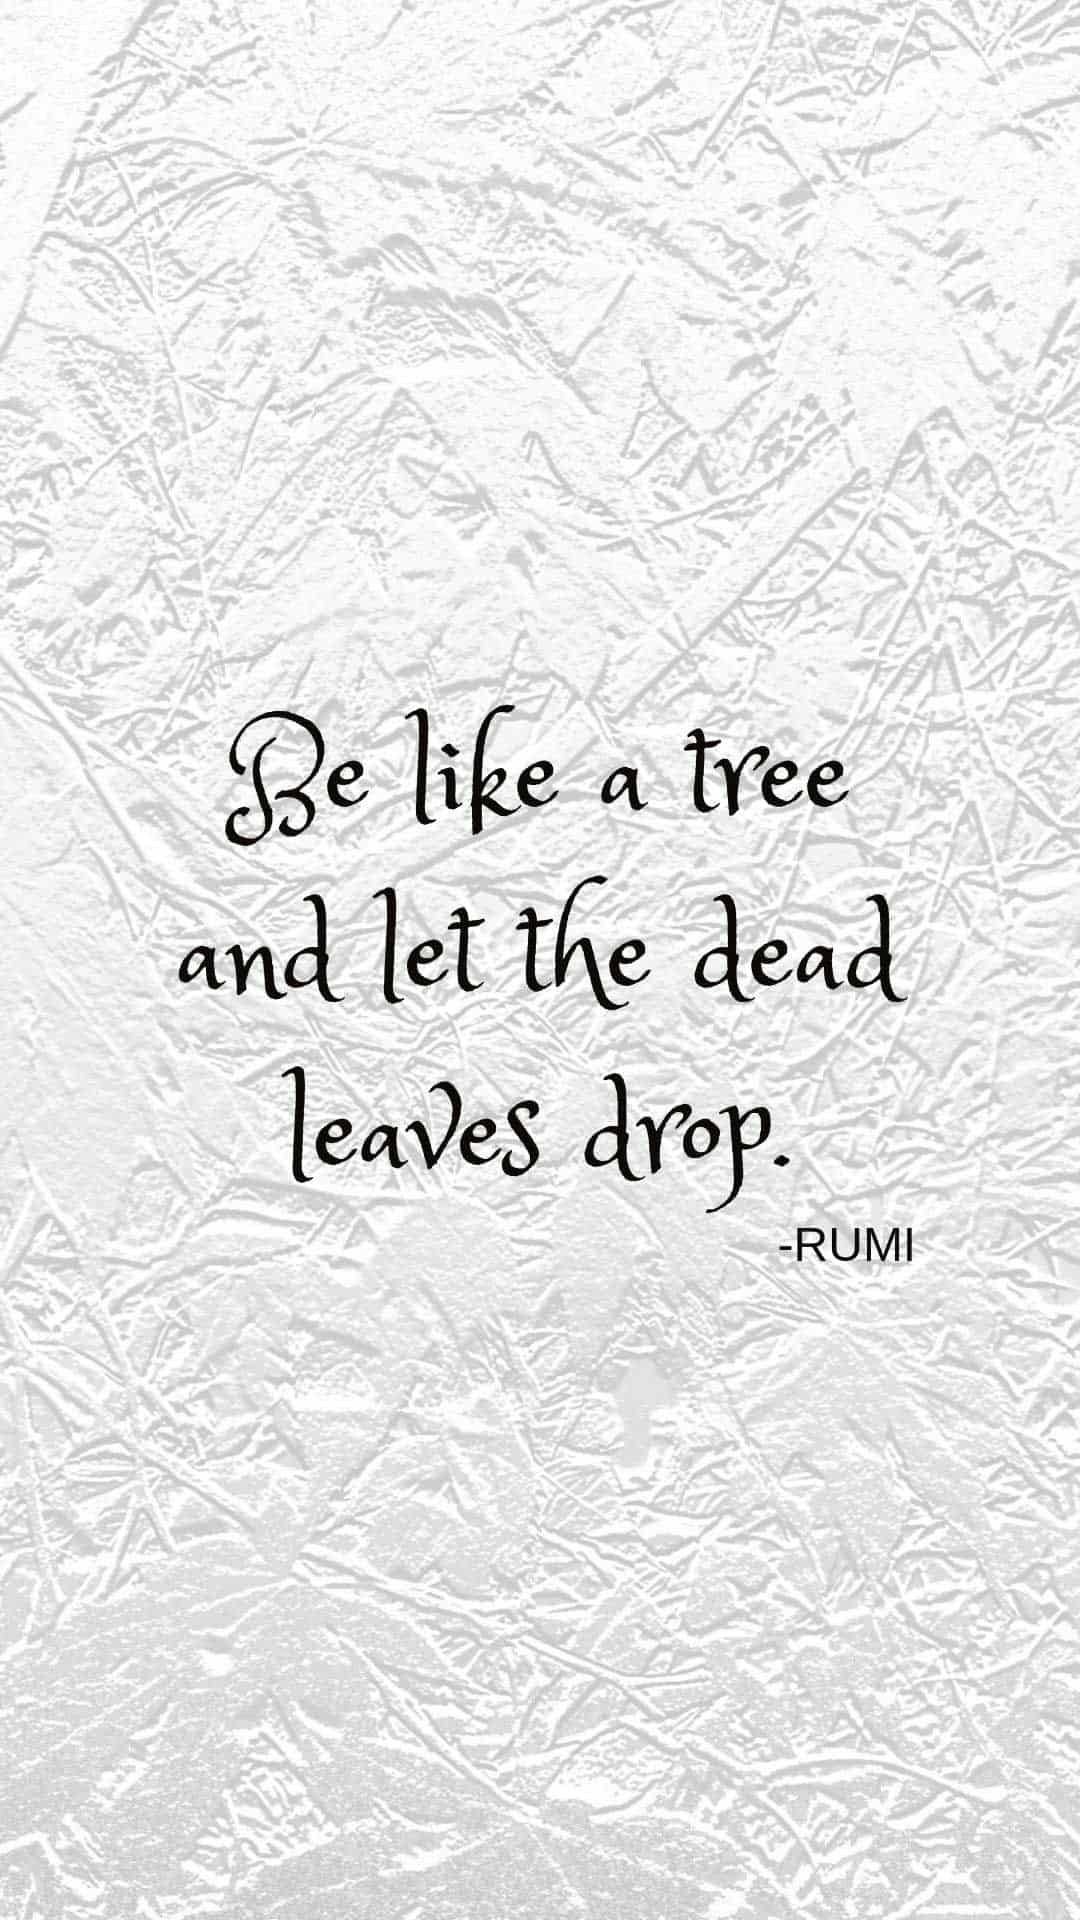 Free Rumi Quote Wallpaper for your phone. The Wise Words of Rumi